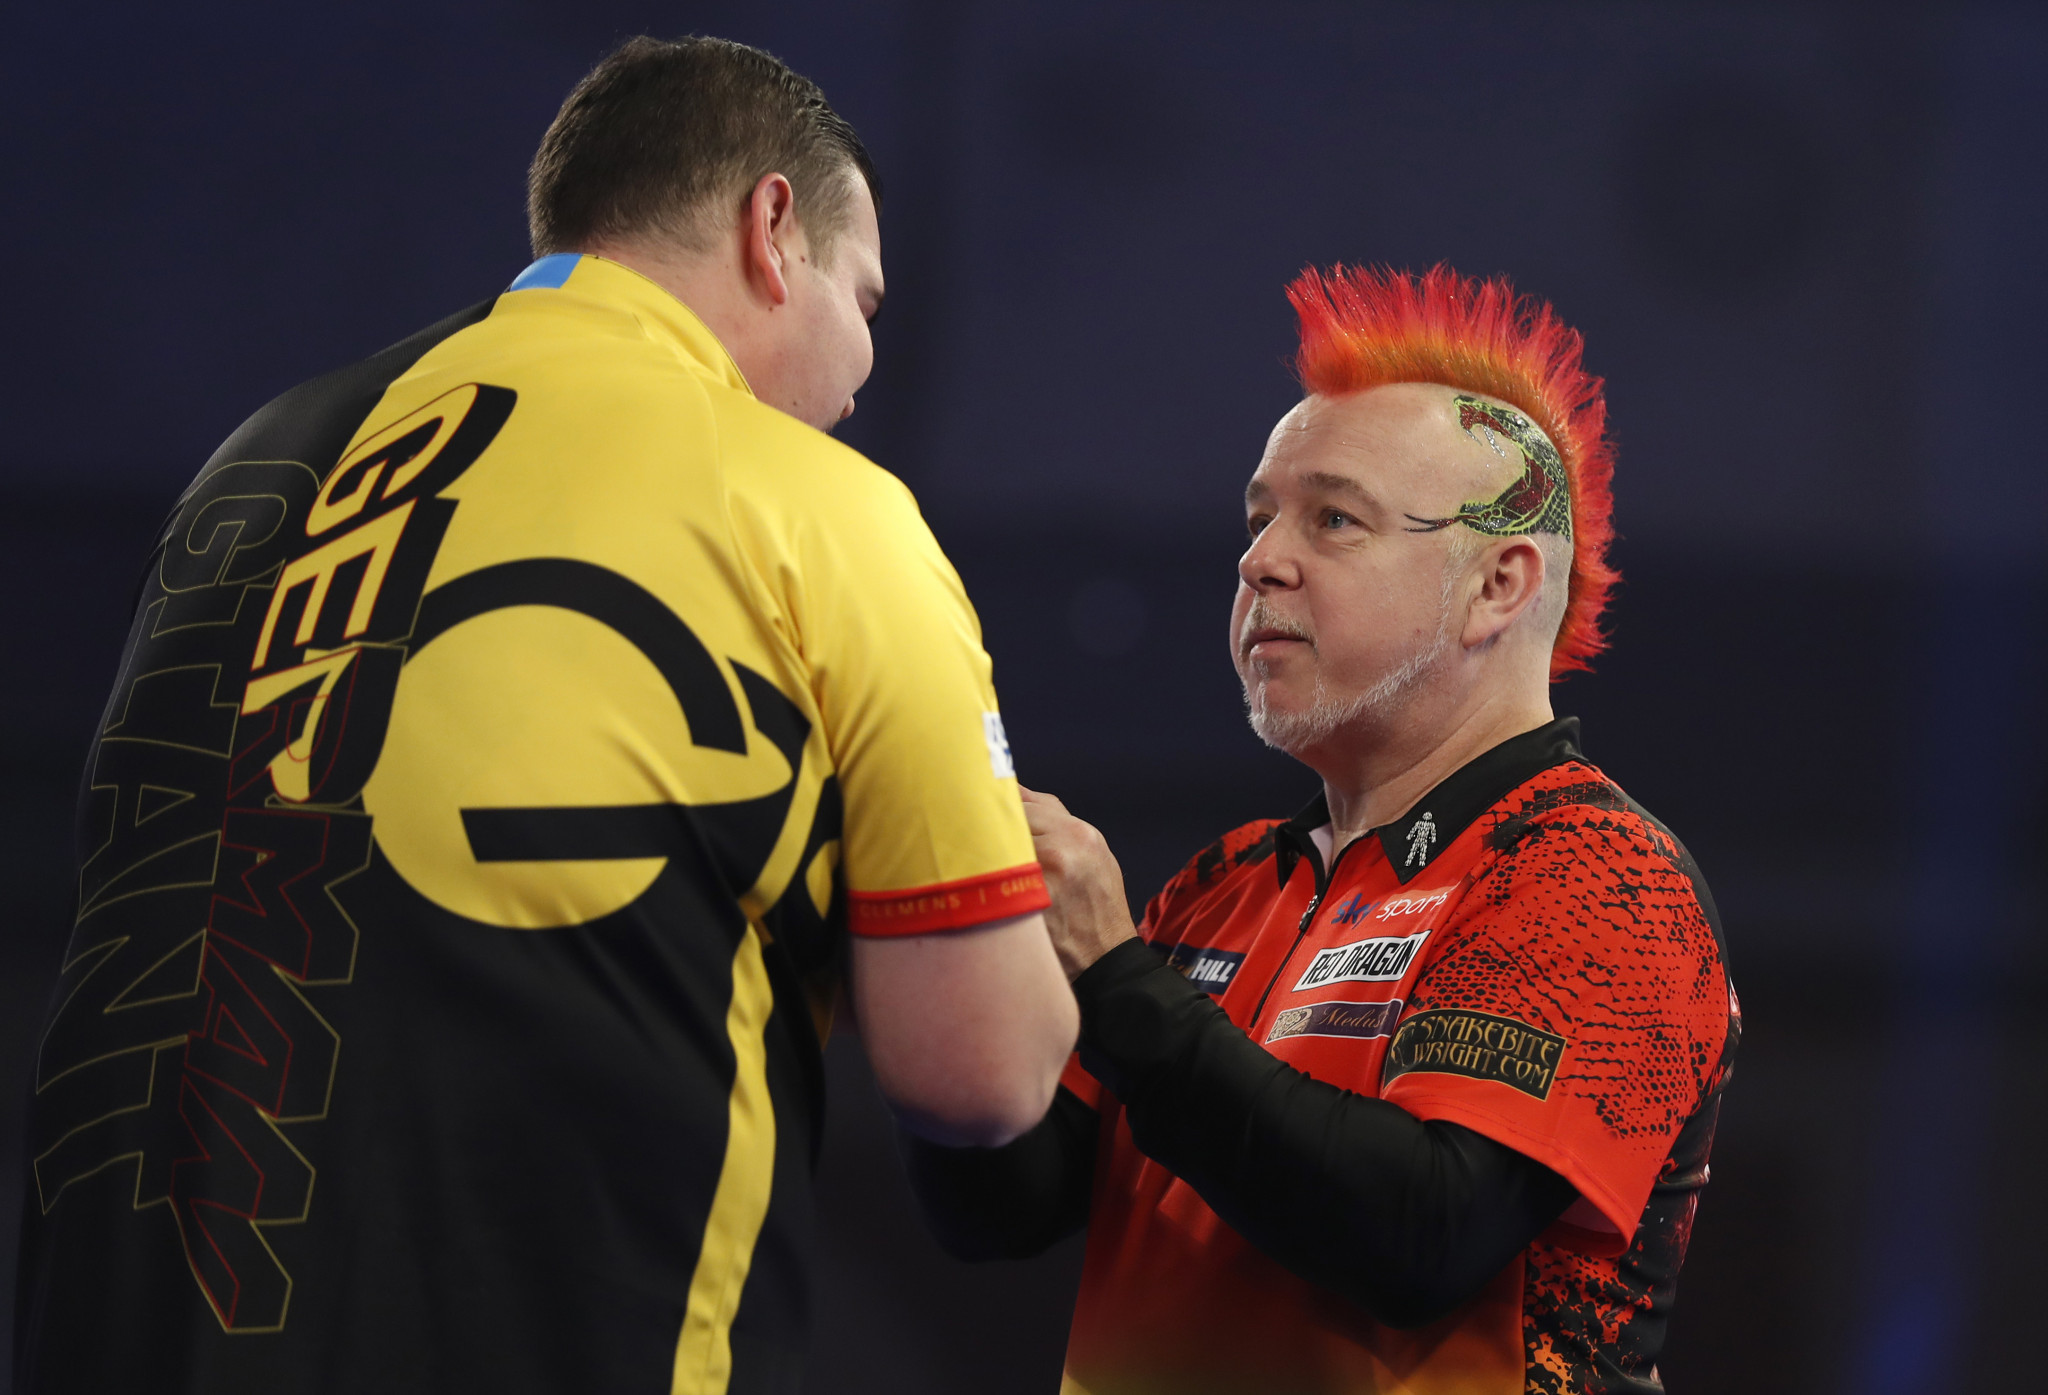 Clemens knocks defending champion Wright out of World Darts Championship